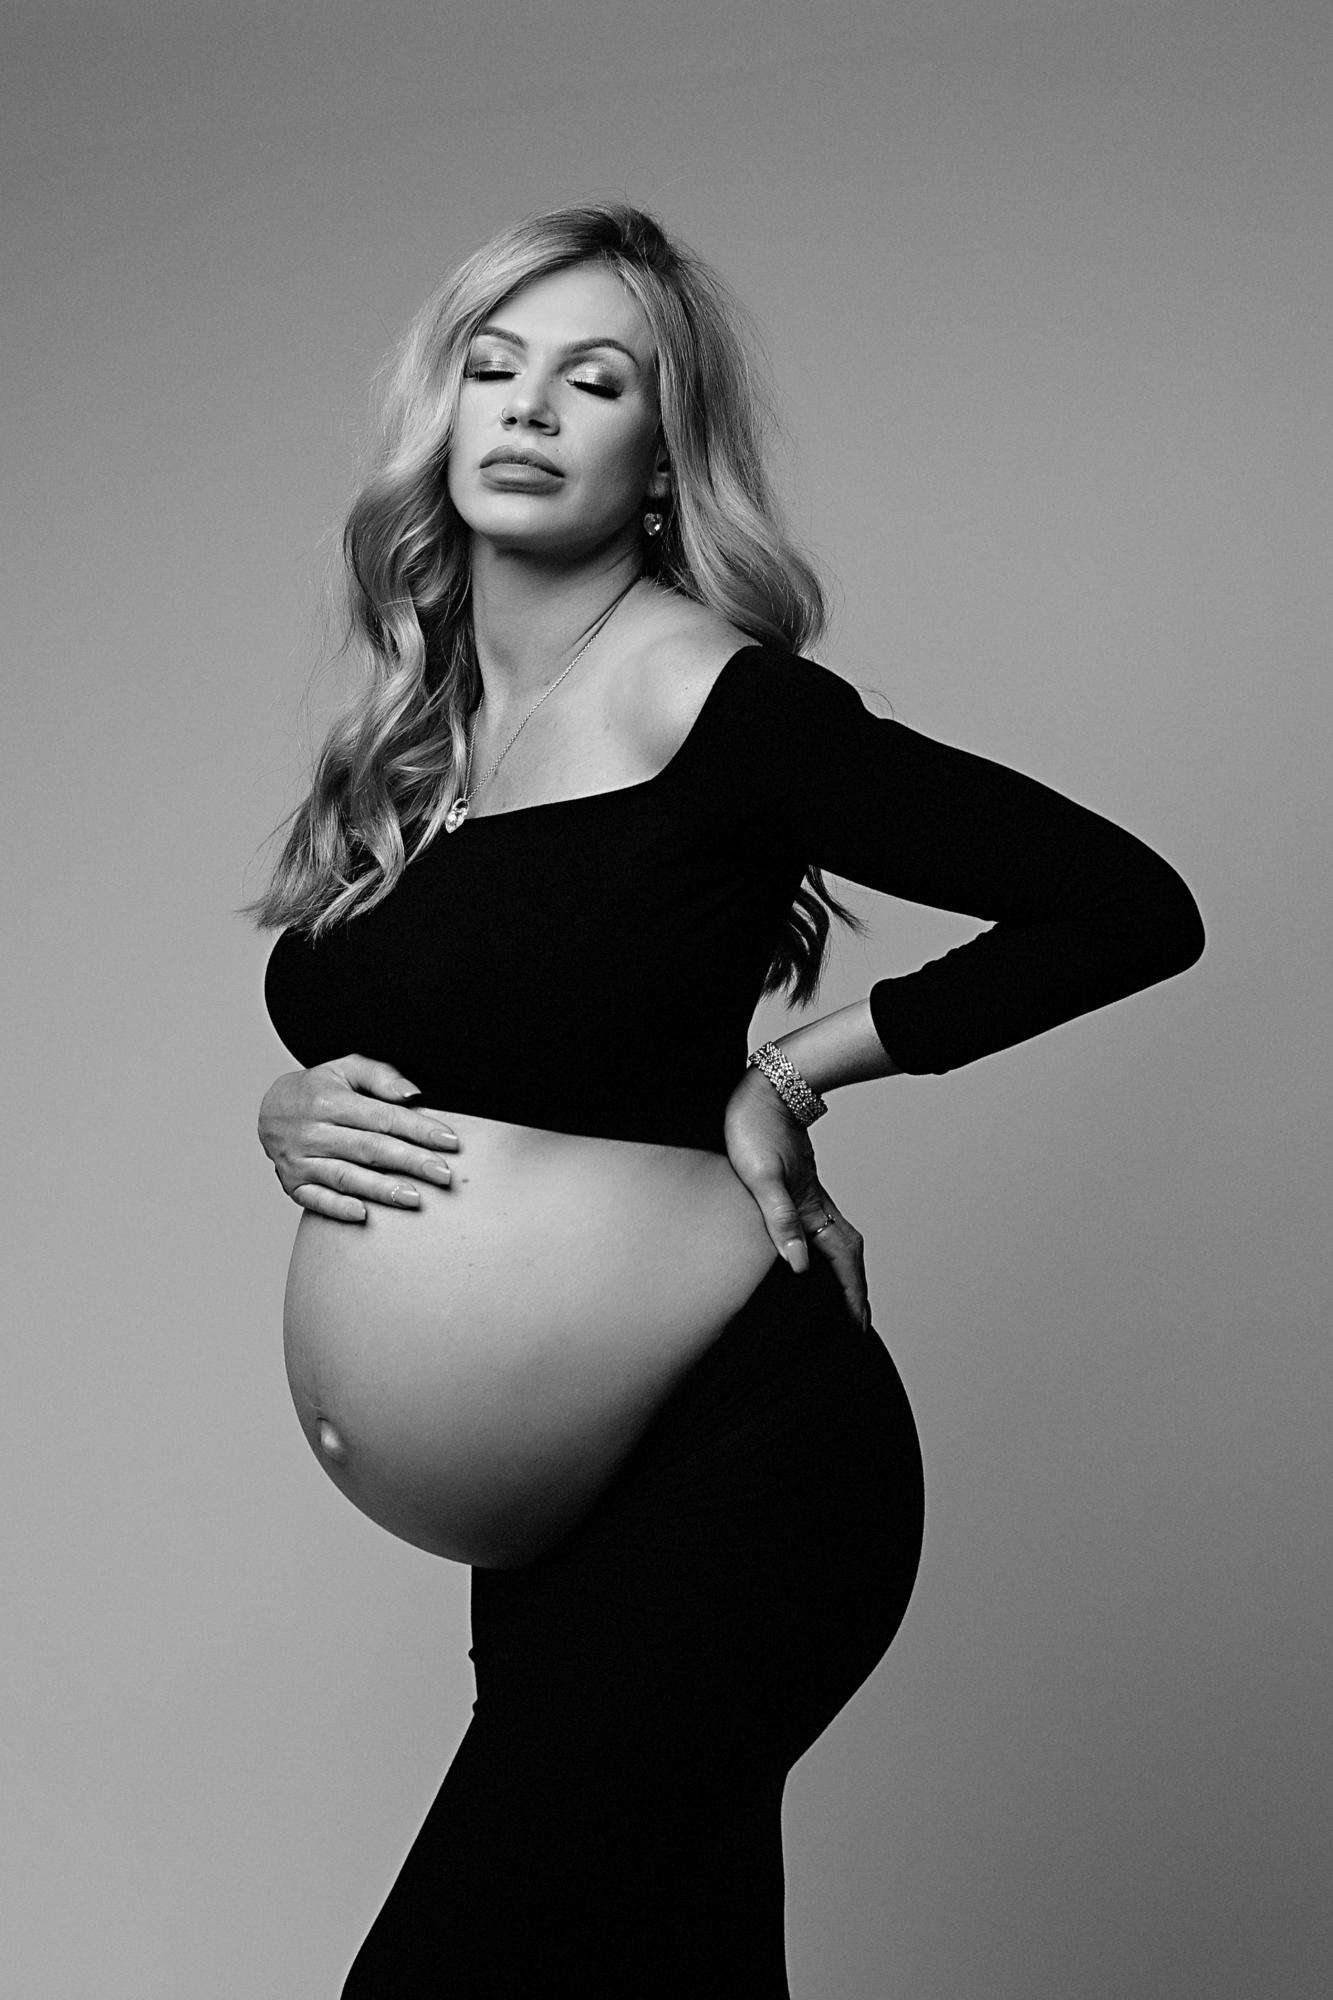 Pregnant Woman Posing with her hand resting gently on her baby bump. She has a black crop top on and skirt. Her hair is blonde and curly.